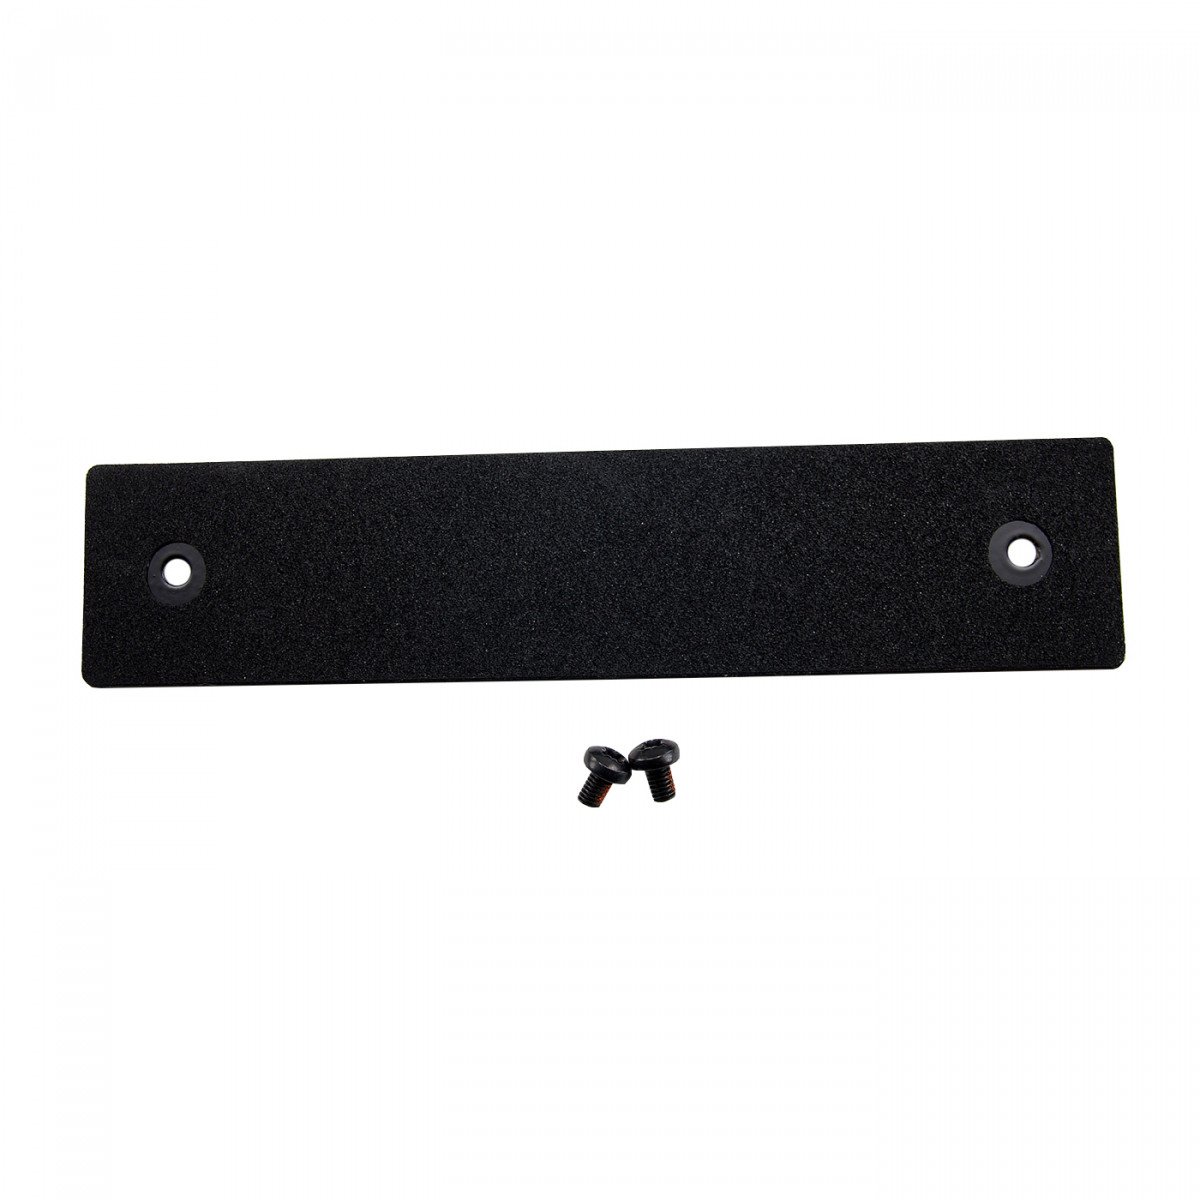 SEPURA cover plate for rear of control panel SCC1 / SCC3 300-00202